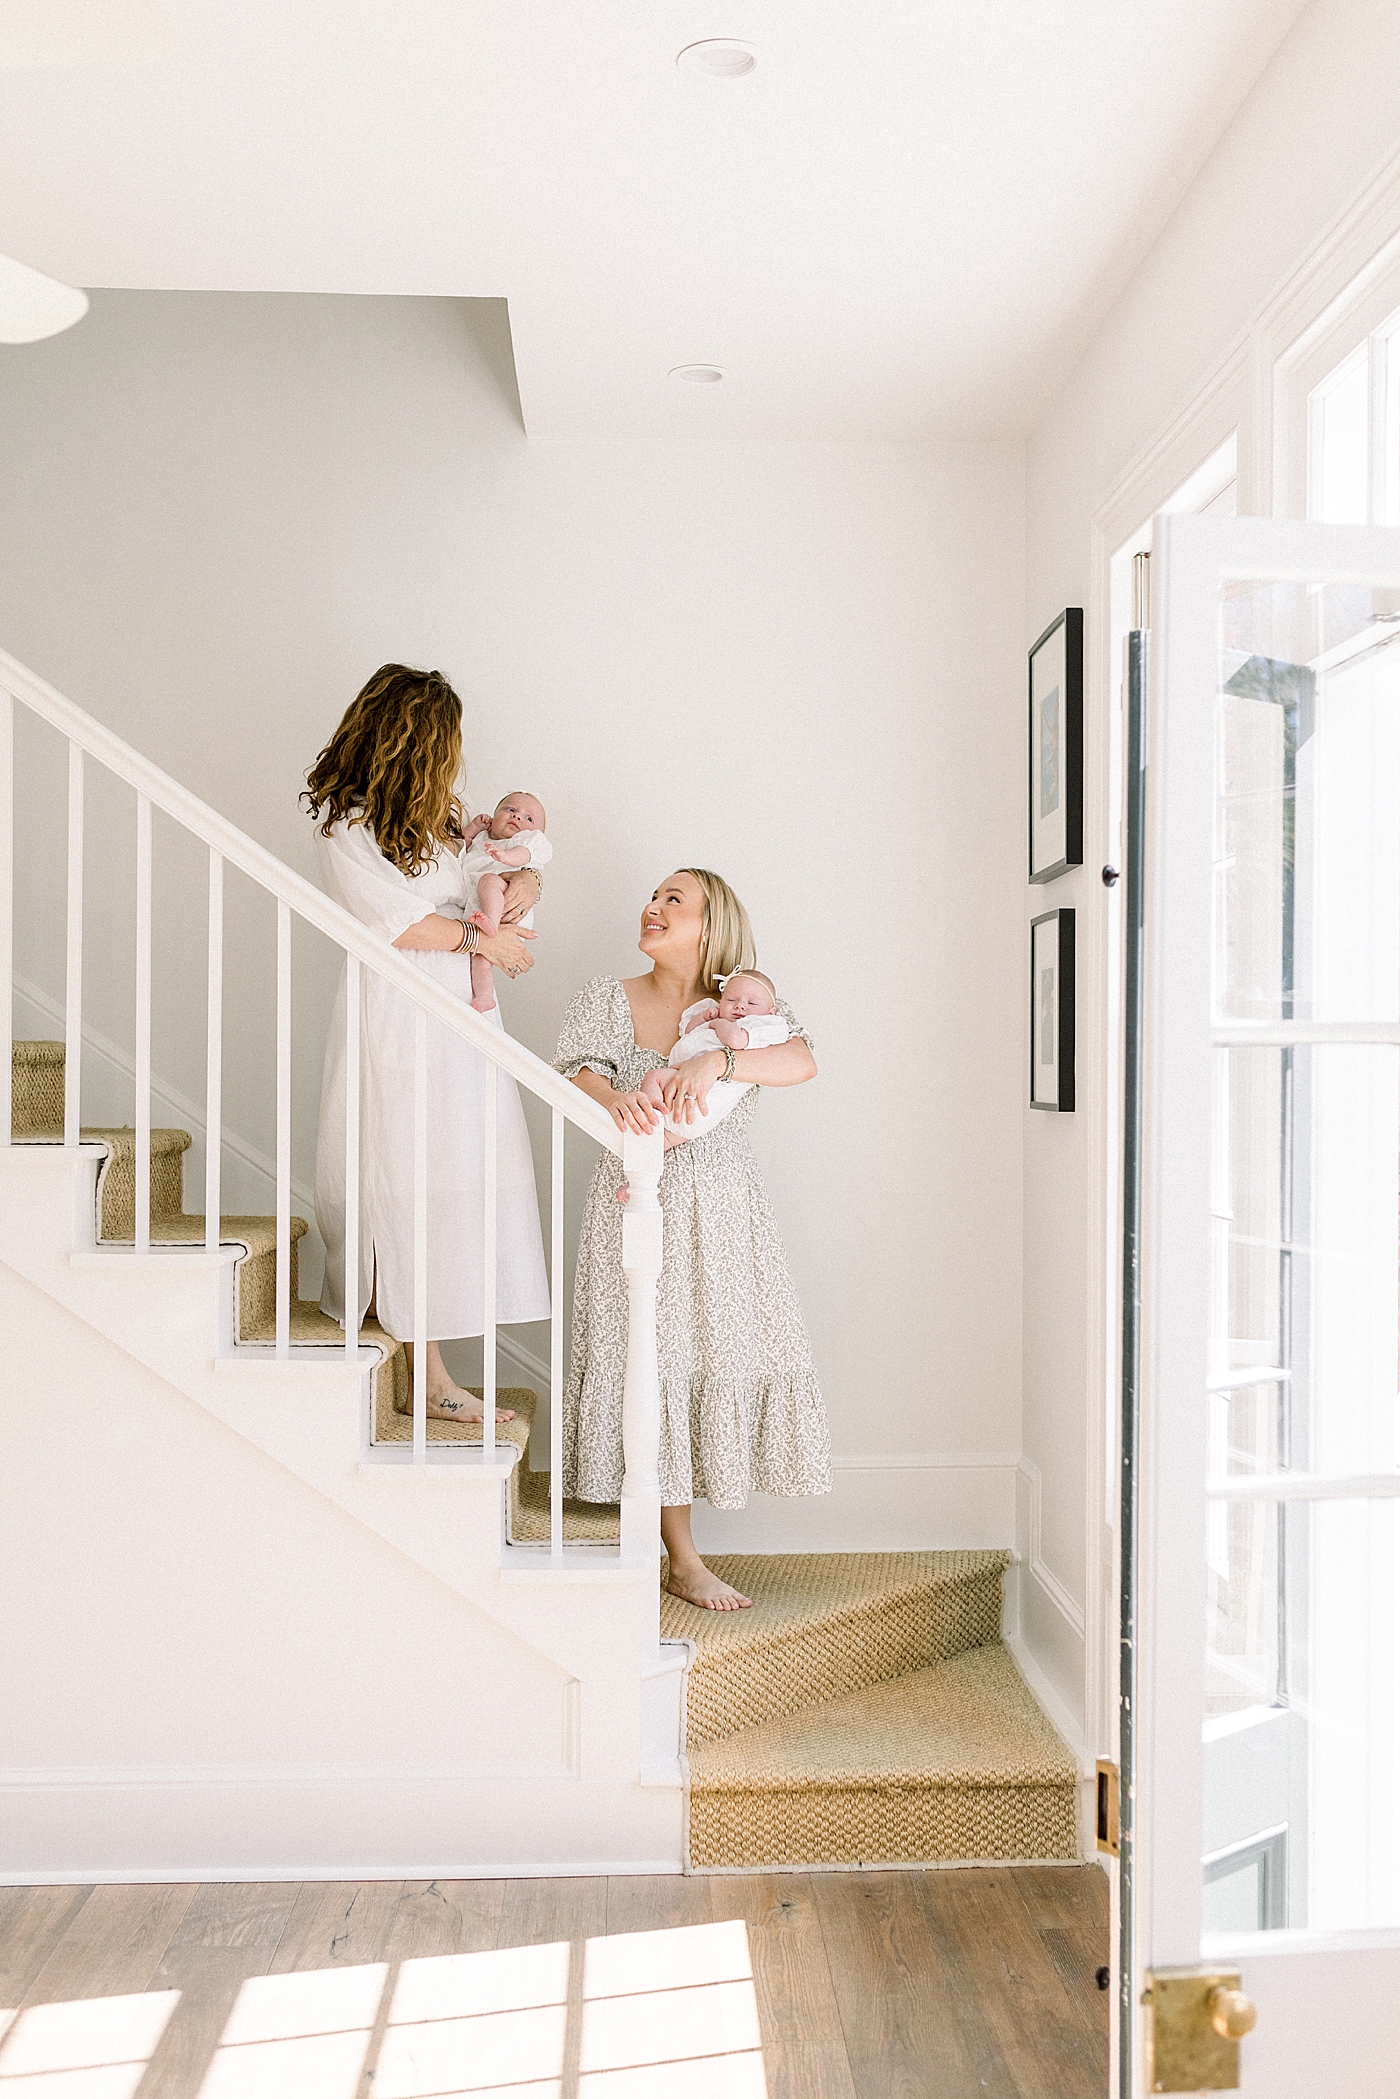 Mother and grandmother in spring dresses holding twins while walking down stairs to a simple foyer | Image by Caitlyn Motycka 